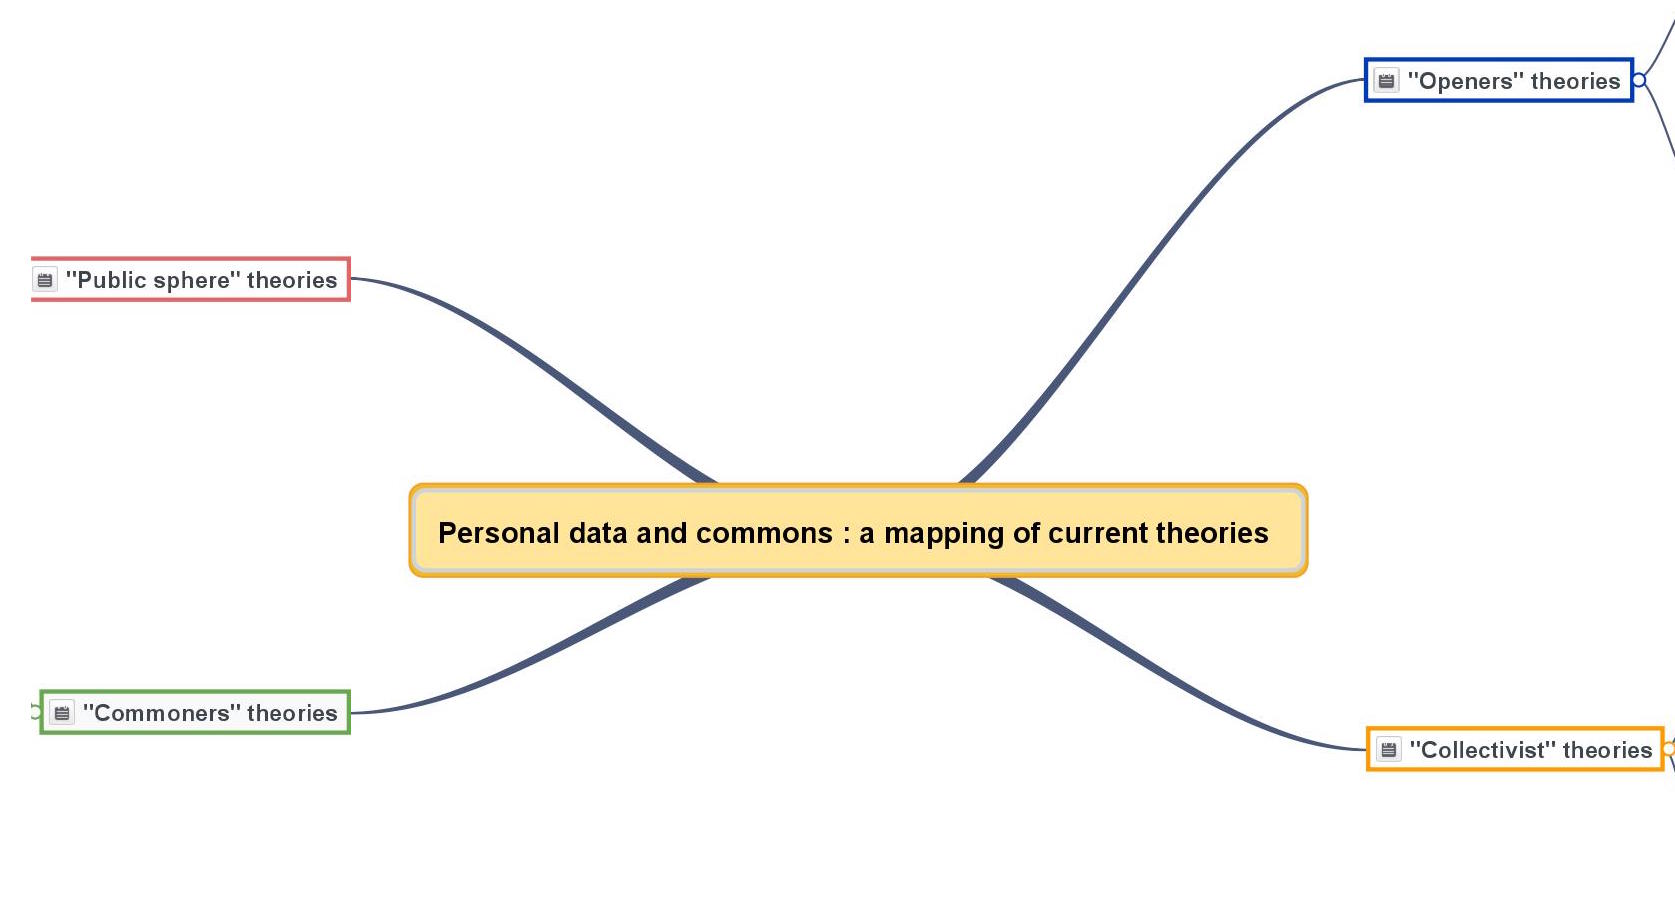 Personal data and commons : a mapping of current theories